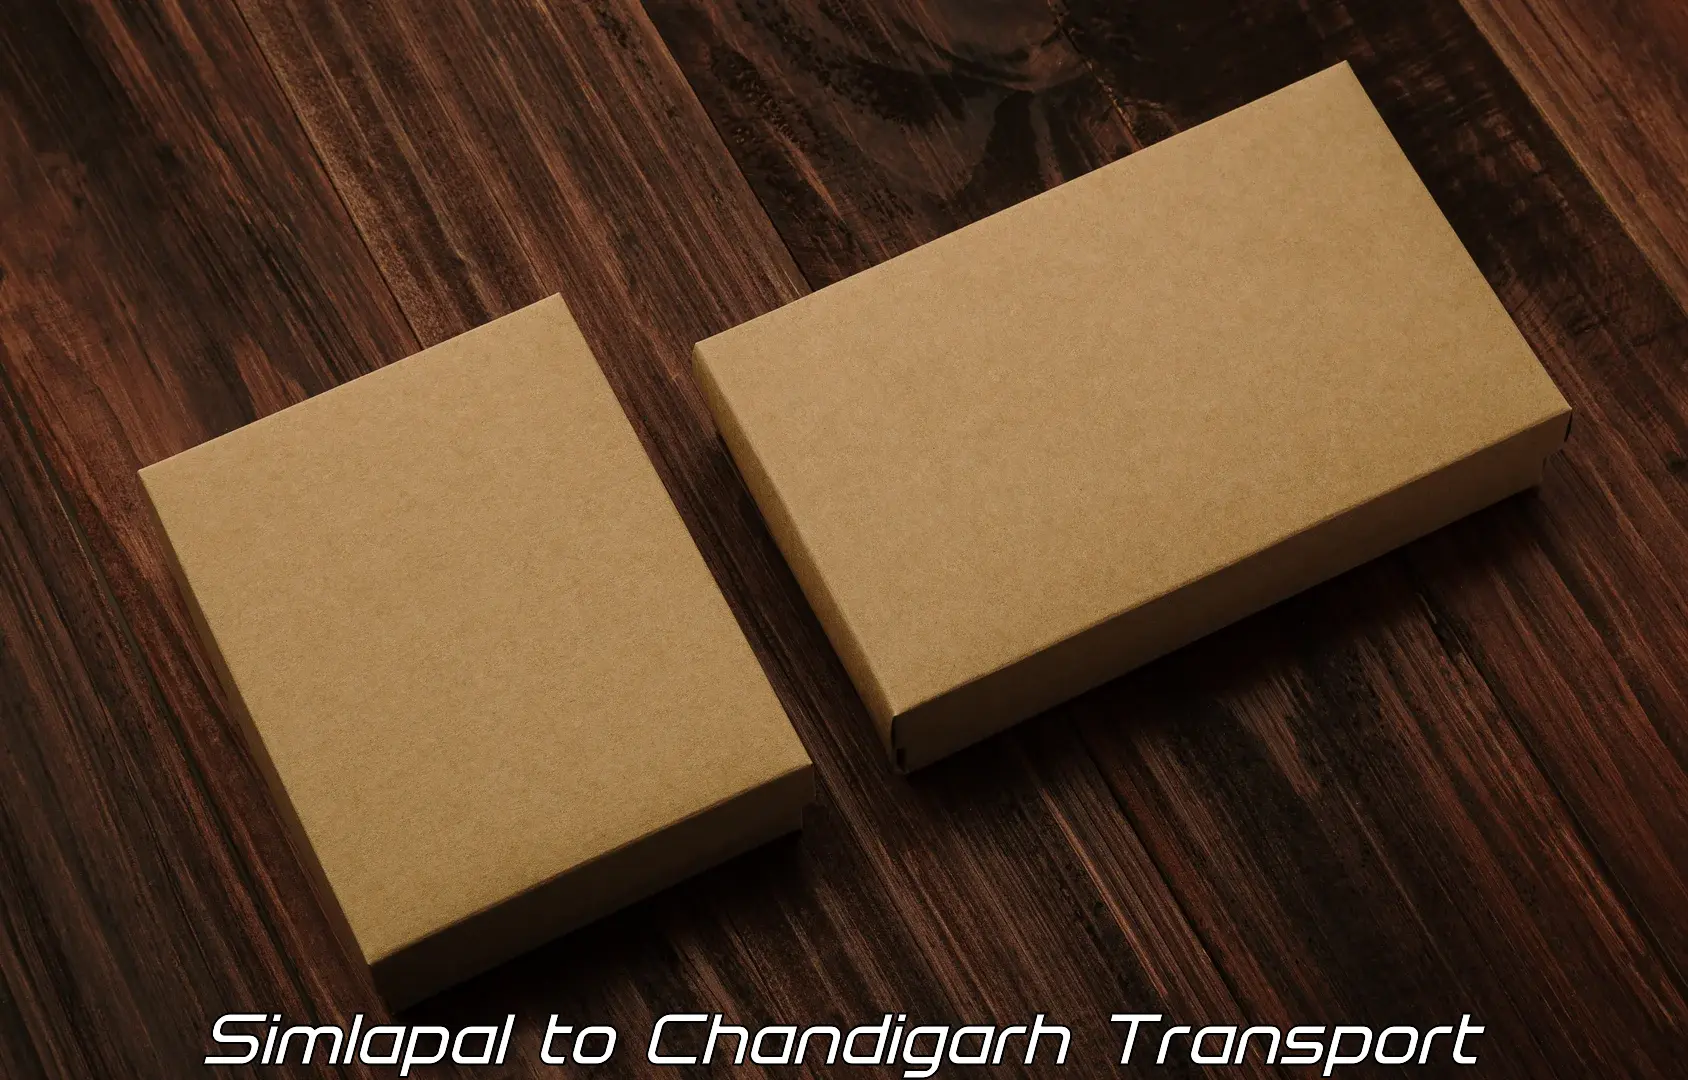 Cycle transportation service Simlapal to Chandigarh